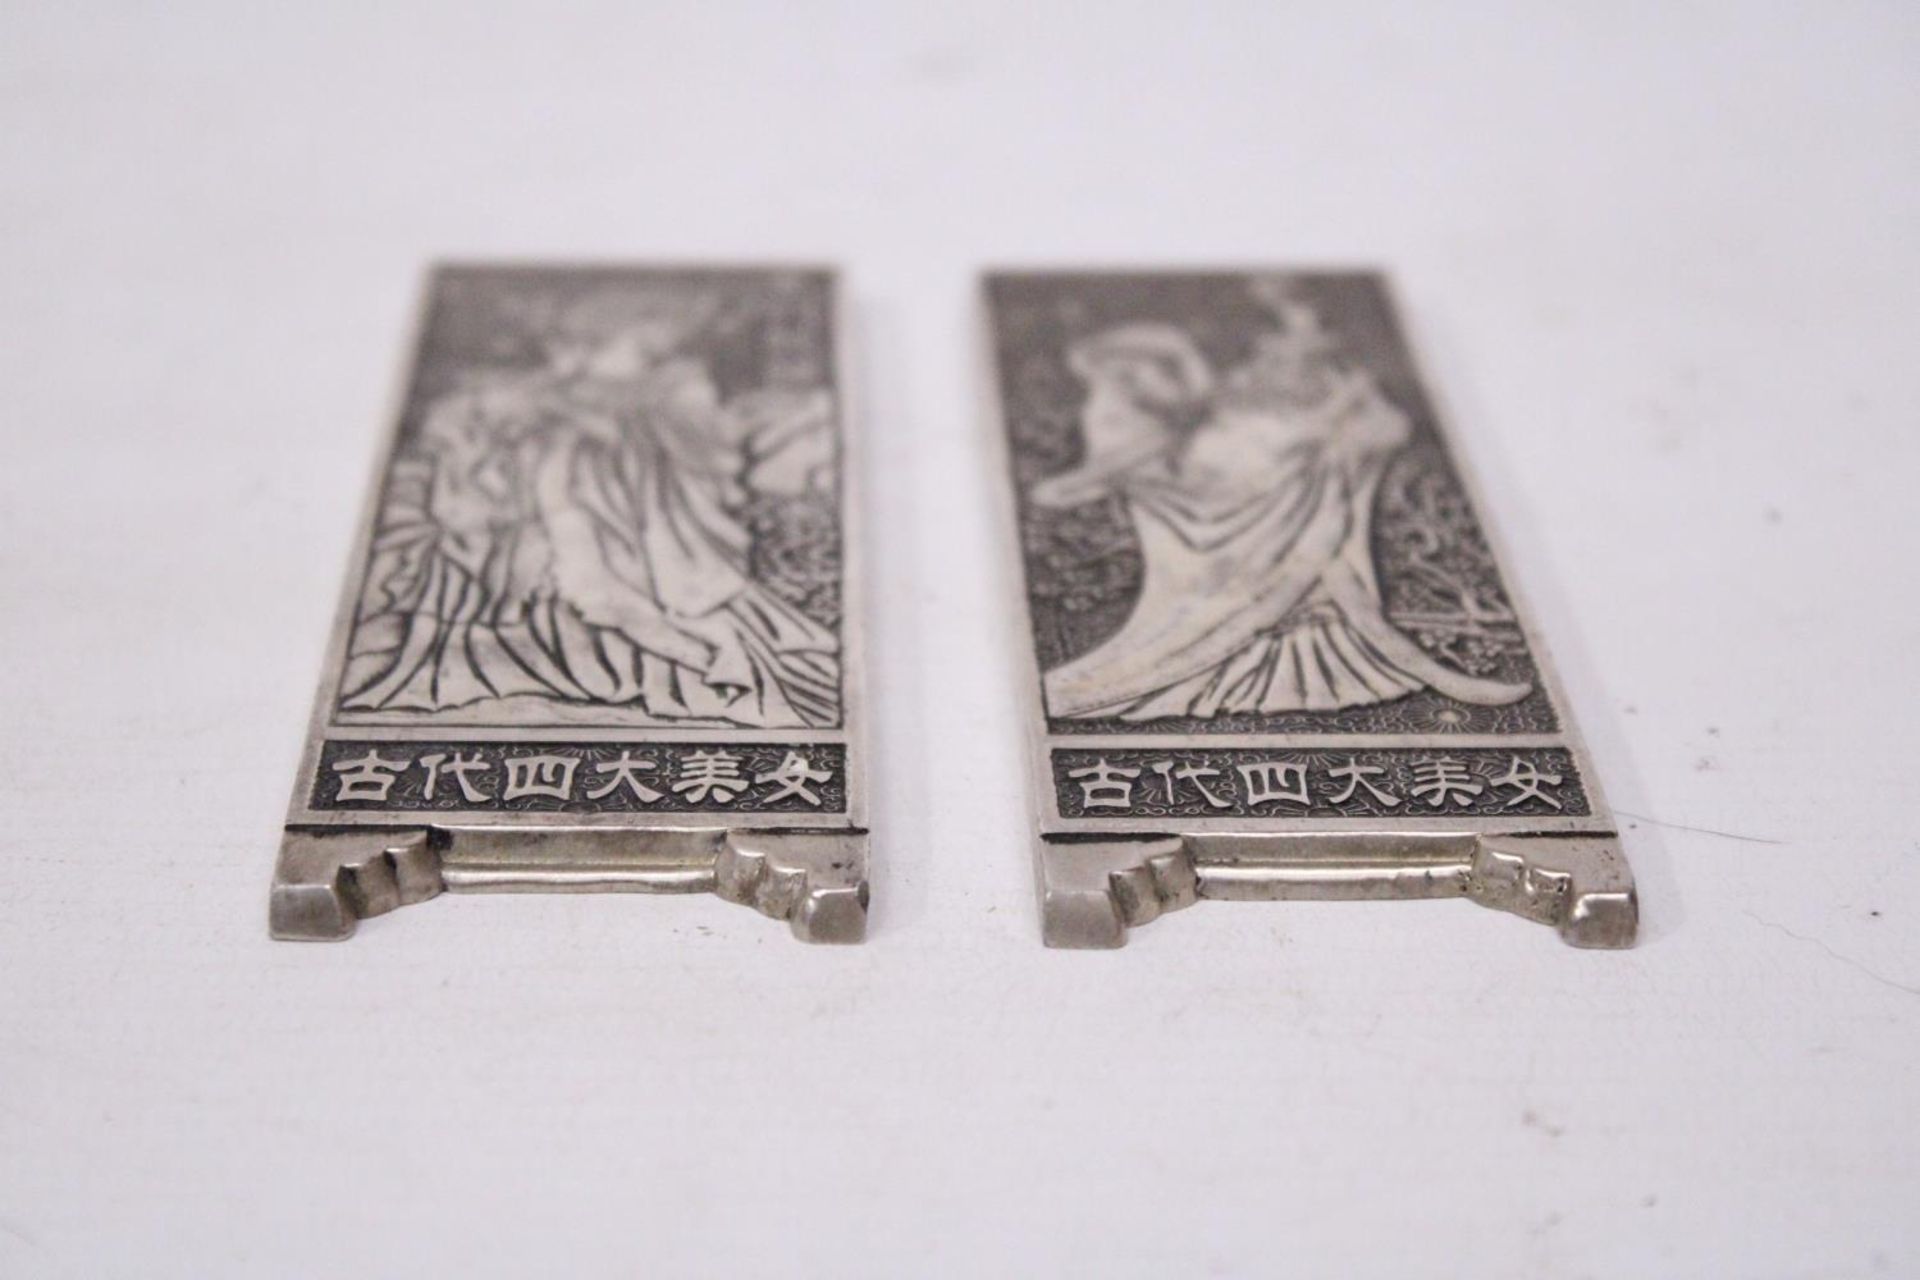 FOUR DECORATIVE WHITE METAL CHINESE ART PICTORIAL PLAQUES/MANUSCRIPT WEIGHTS - Image 4 of 6